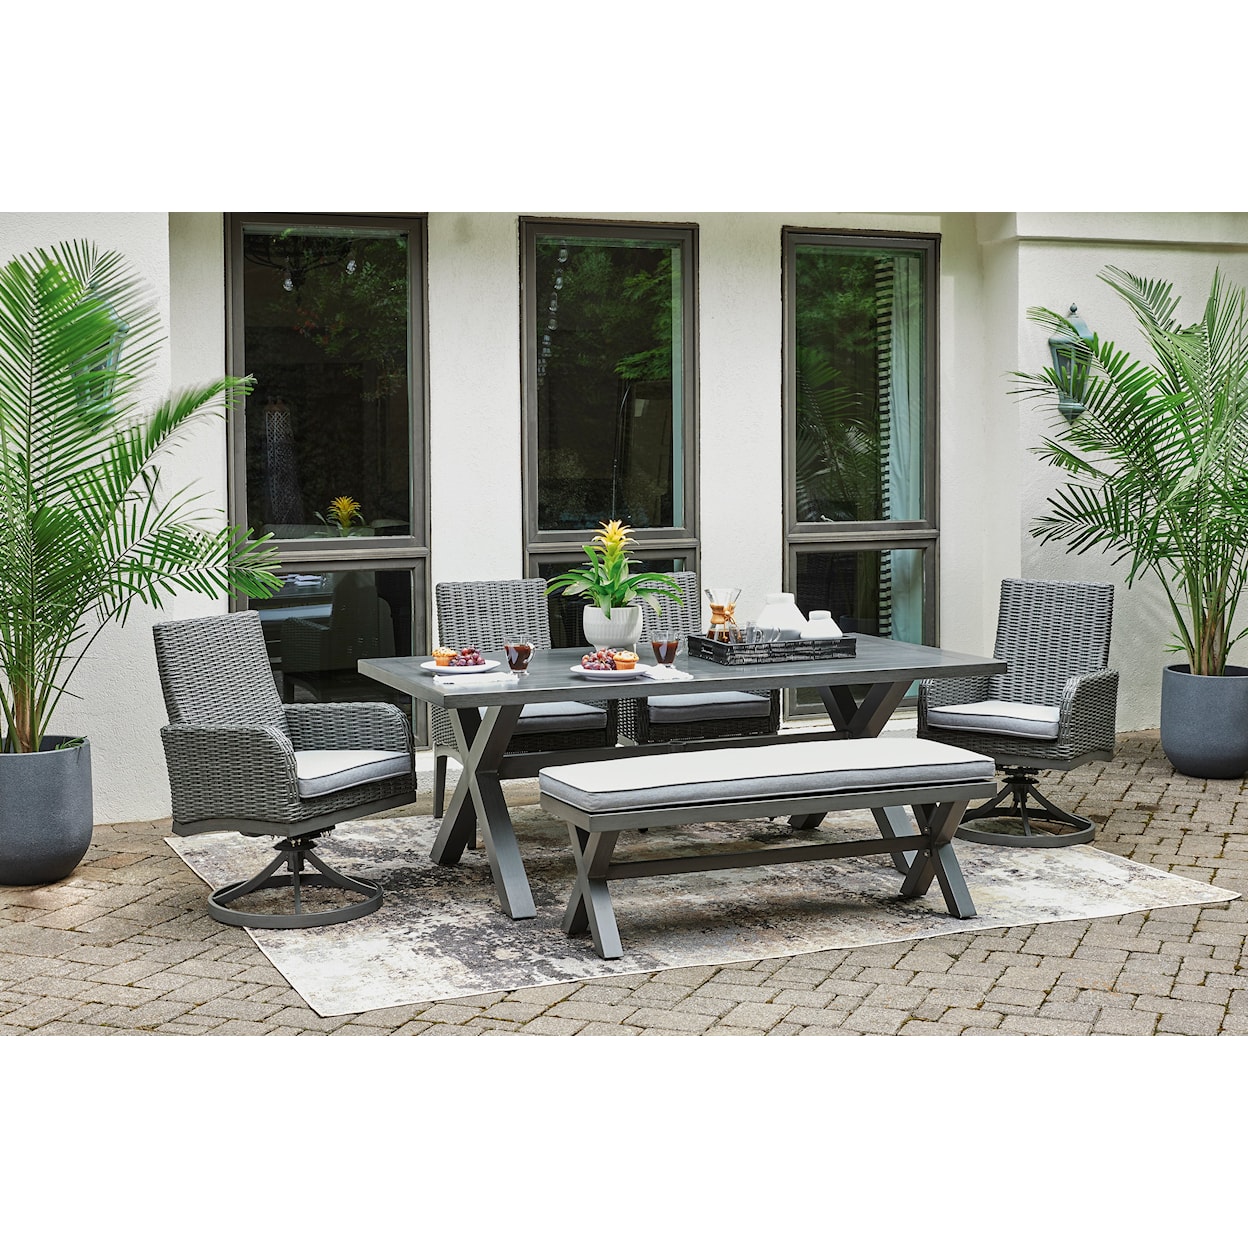 Signature Design by Ashley Elite Park Outdoor Bench with Cushion